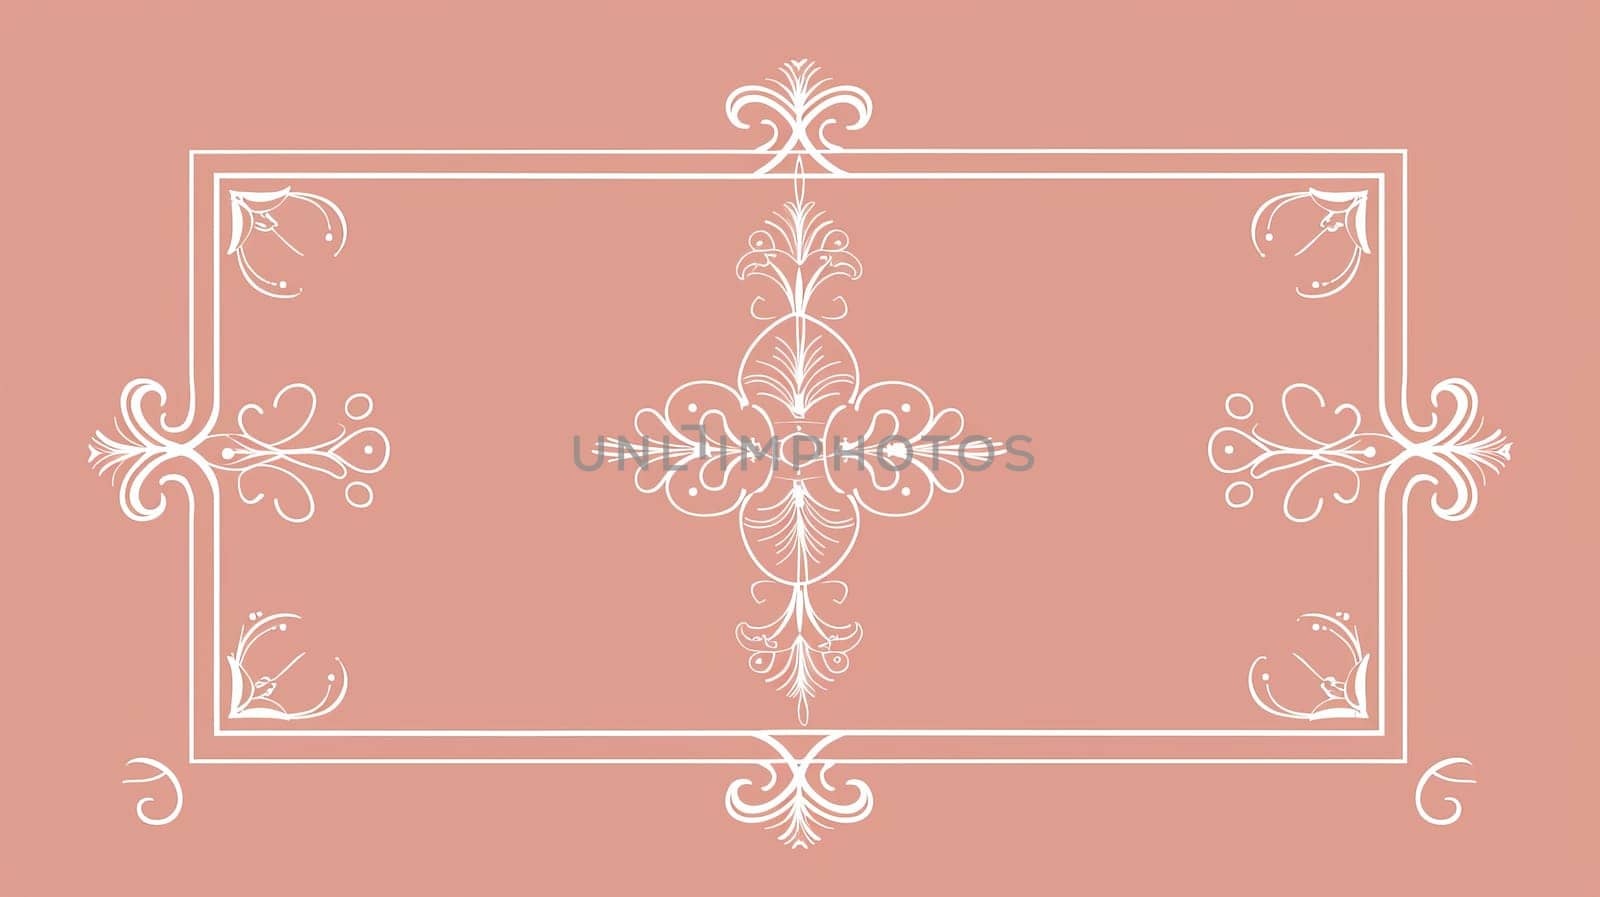 An elegant art nouveau classic antique design illustration with white lines on a pink background. Premium design illustration for a gala, a grand opening, or an art deco theme wedding.